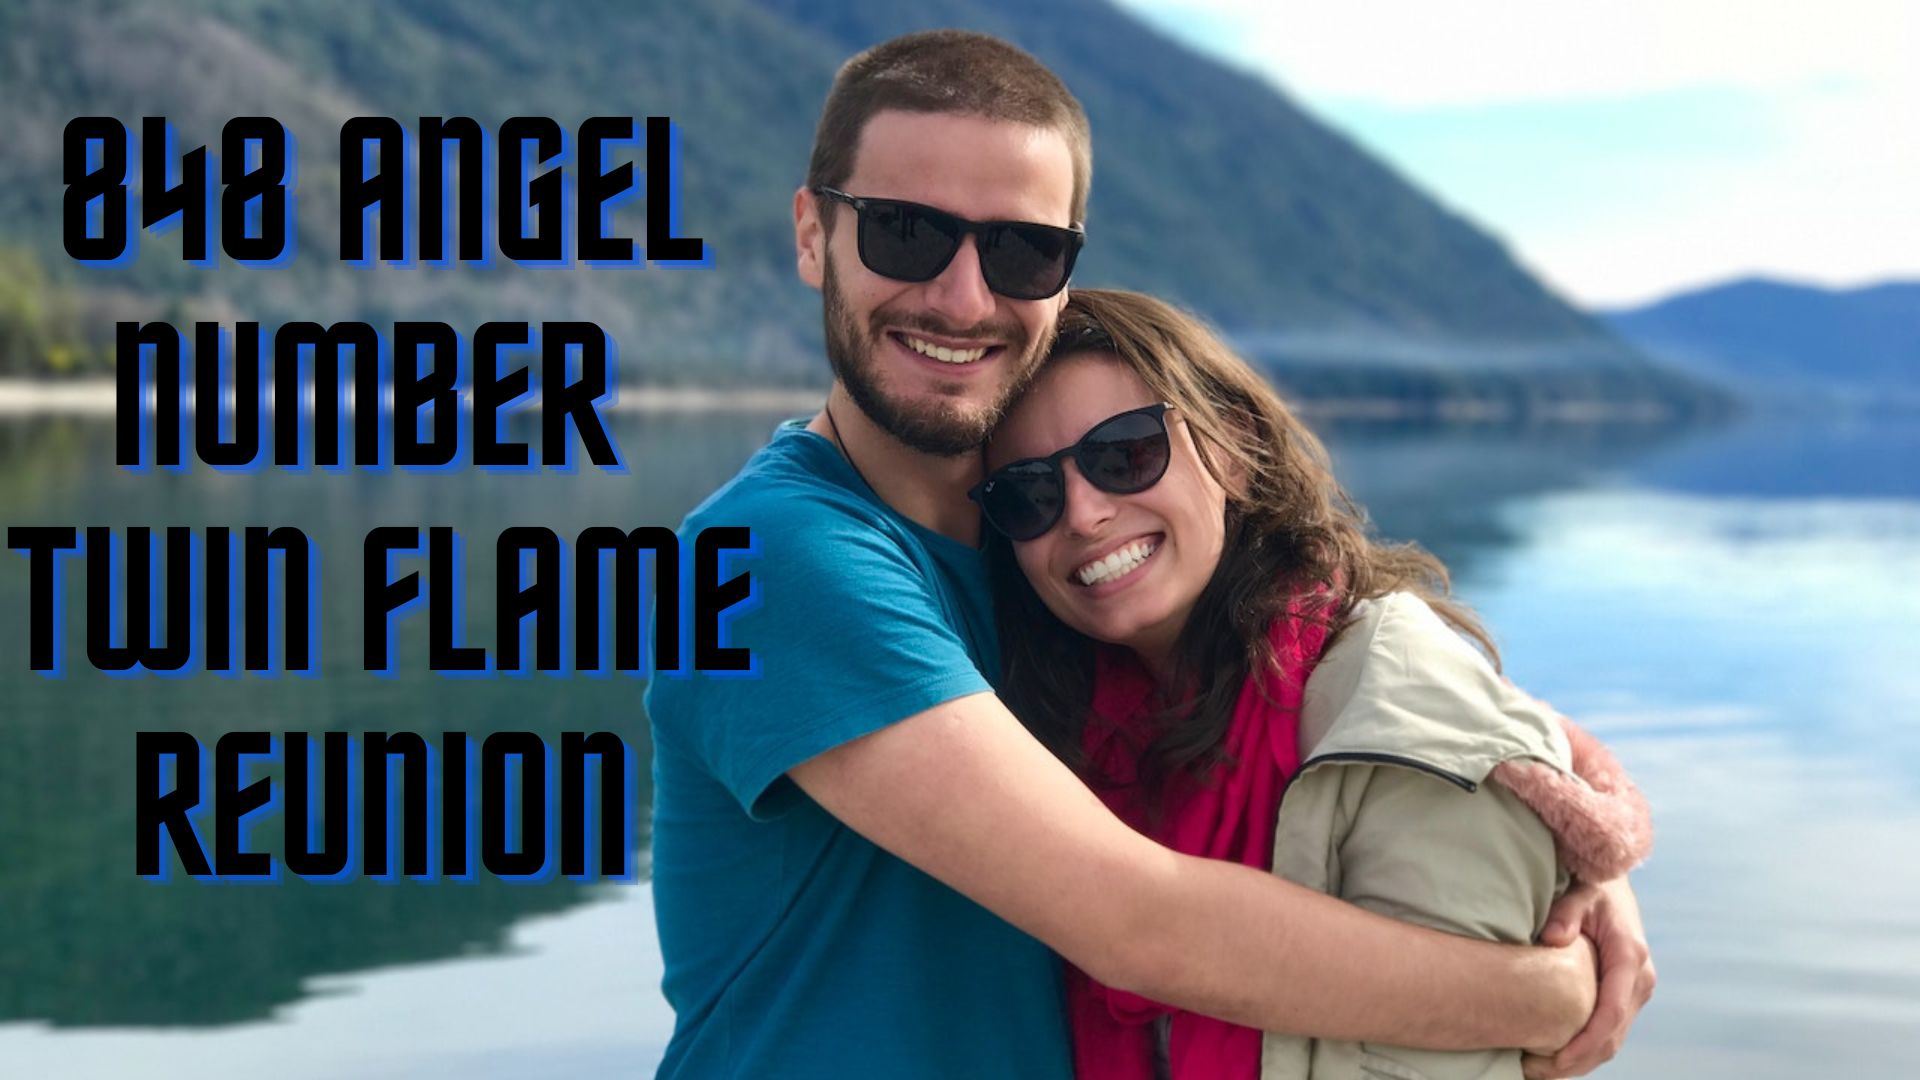 848 Angel Number Twin Flame Reunion - A Sign That Big Changes Are Coming For You